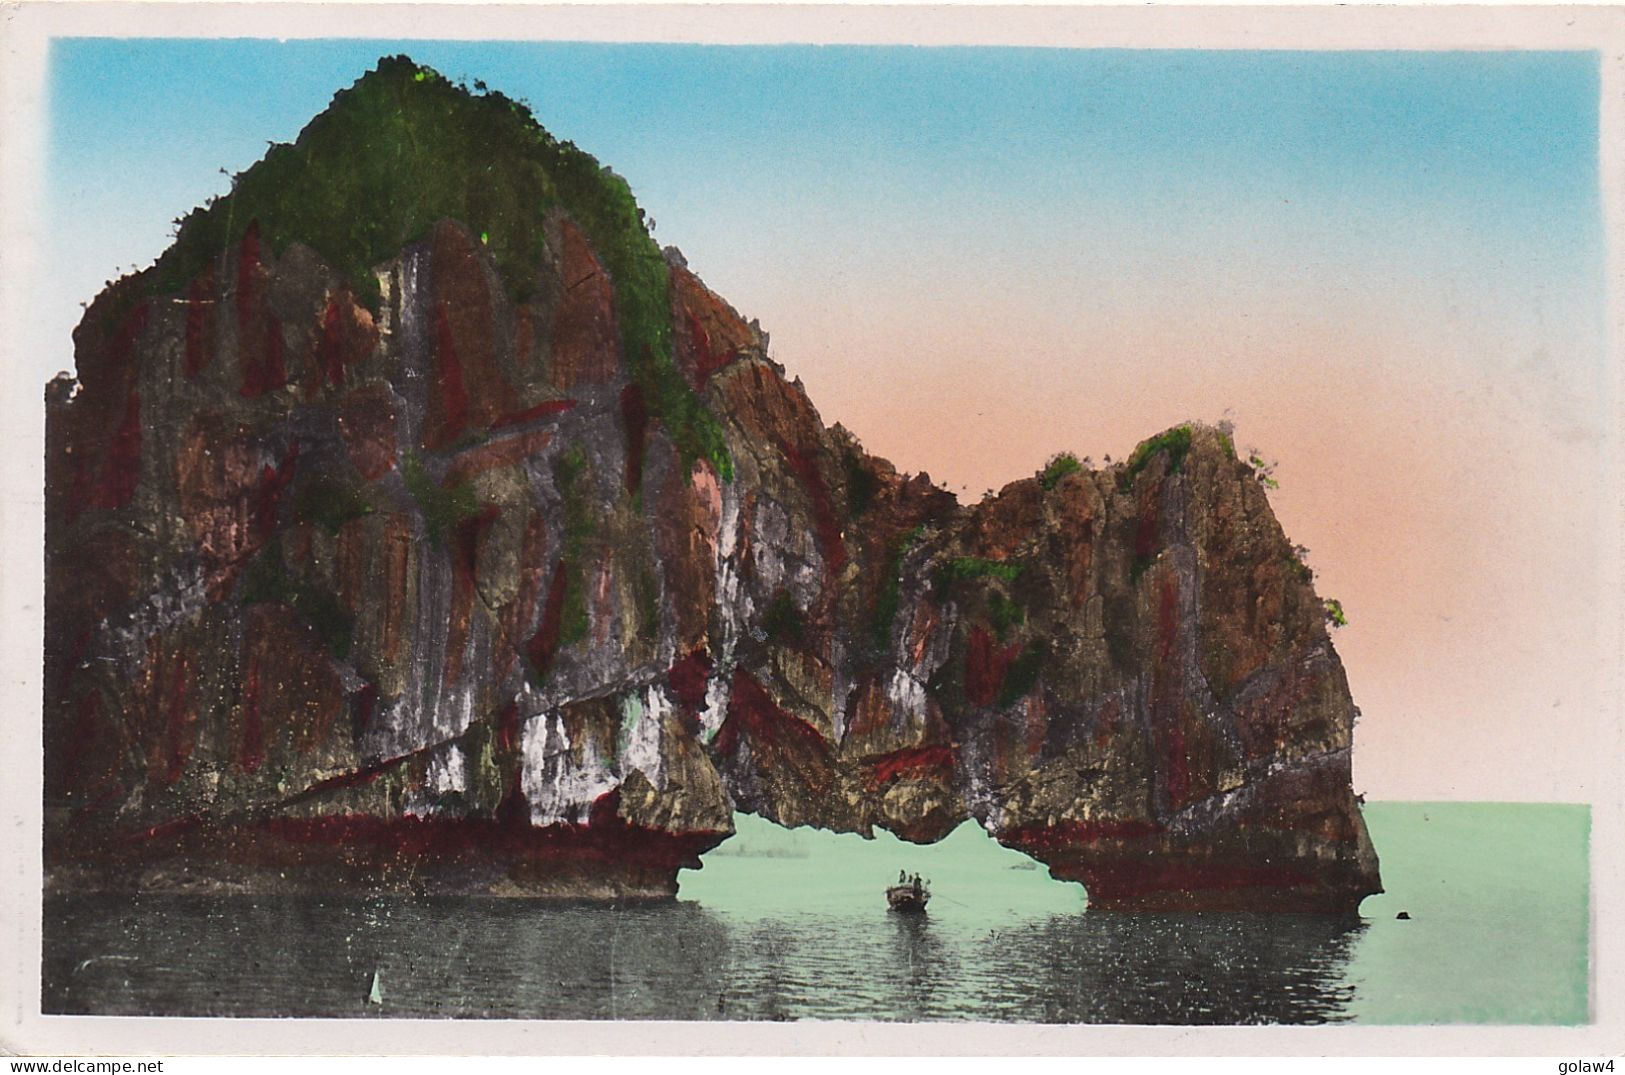 36650# CARTE POSTALE NORD VIETNAM BAIE ALONG QUANG YEN ARCHE POSTE AUX ARMEES TOE 1952 T.O.E. INDOCHINE ROMBAS MOSELLE - War Of Indo-China / Vietnam